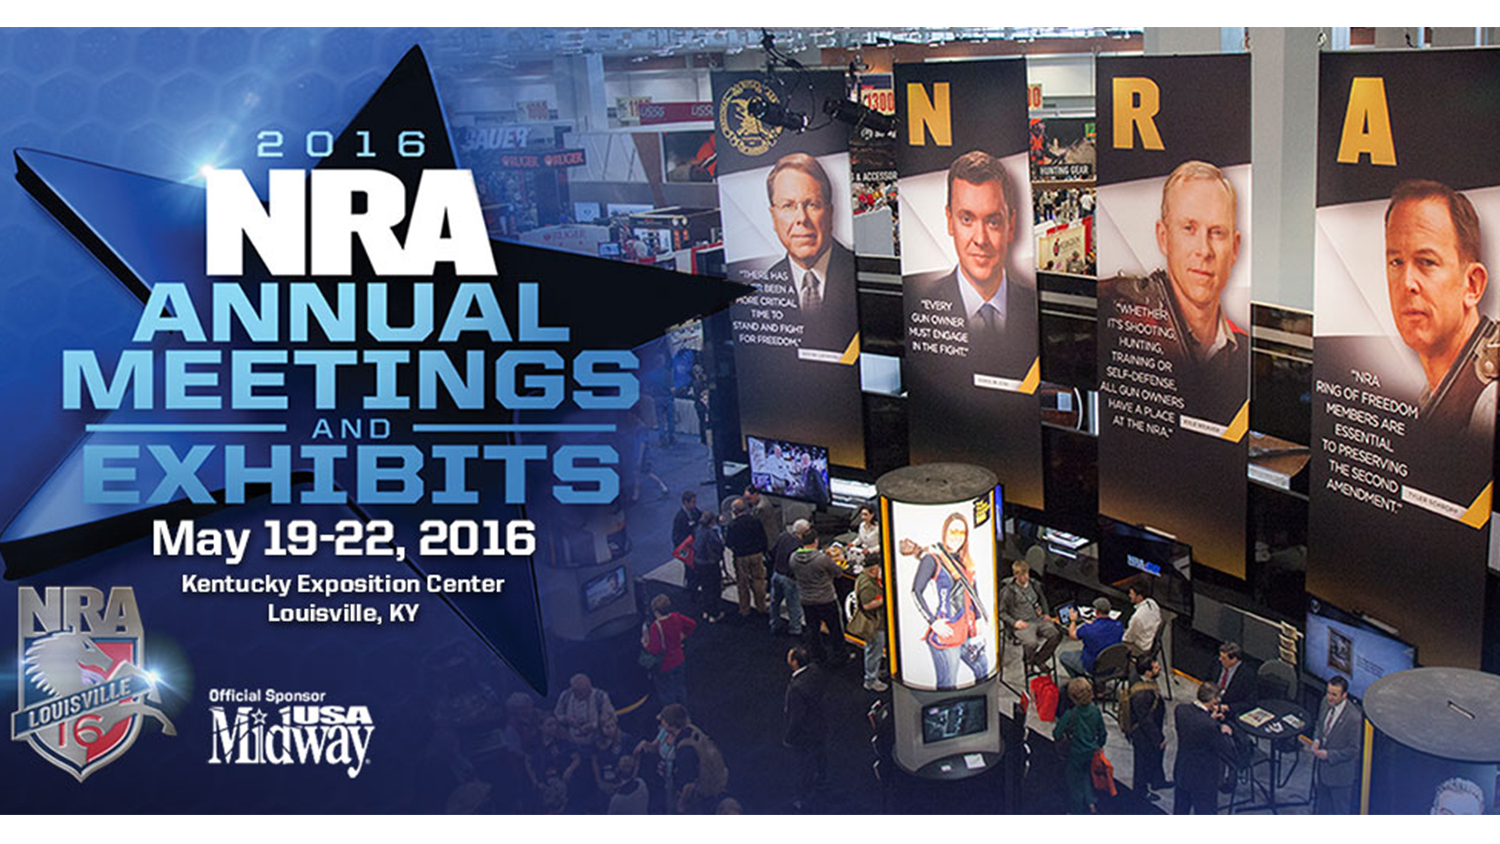 NRA Blog NRA Annual Meetings Events on Saturday, May 21